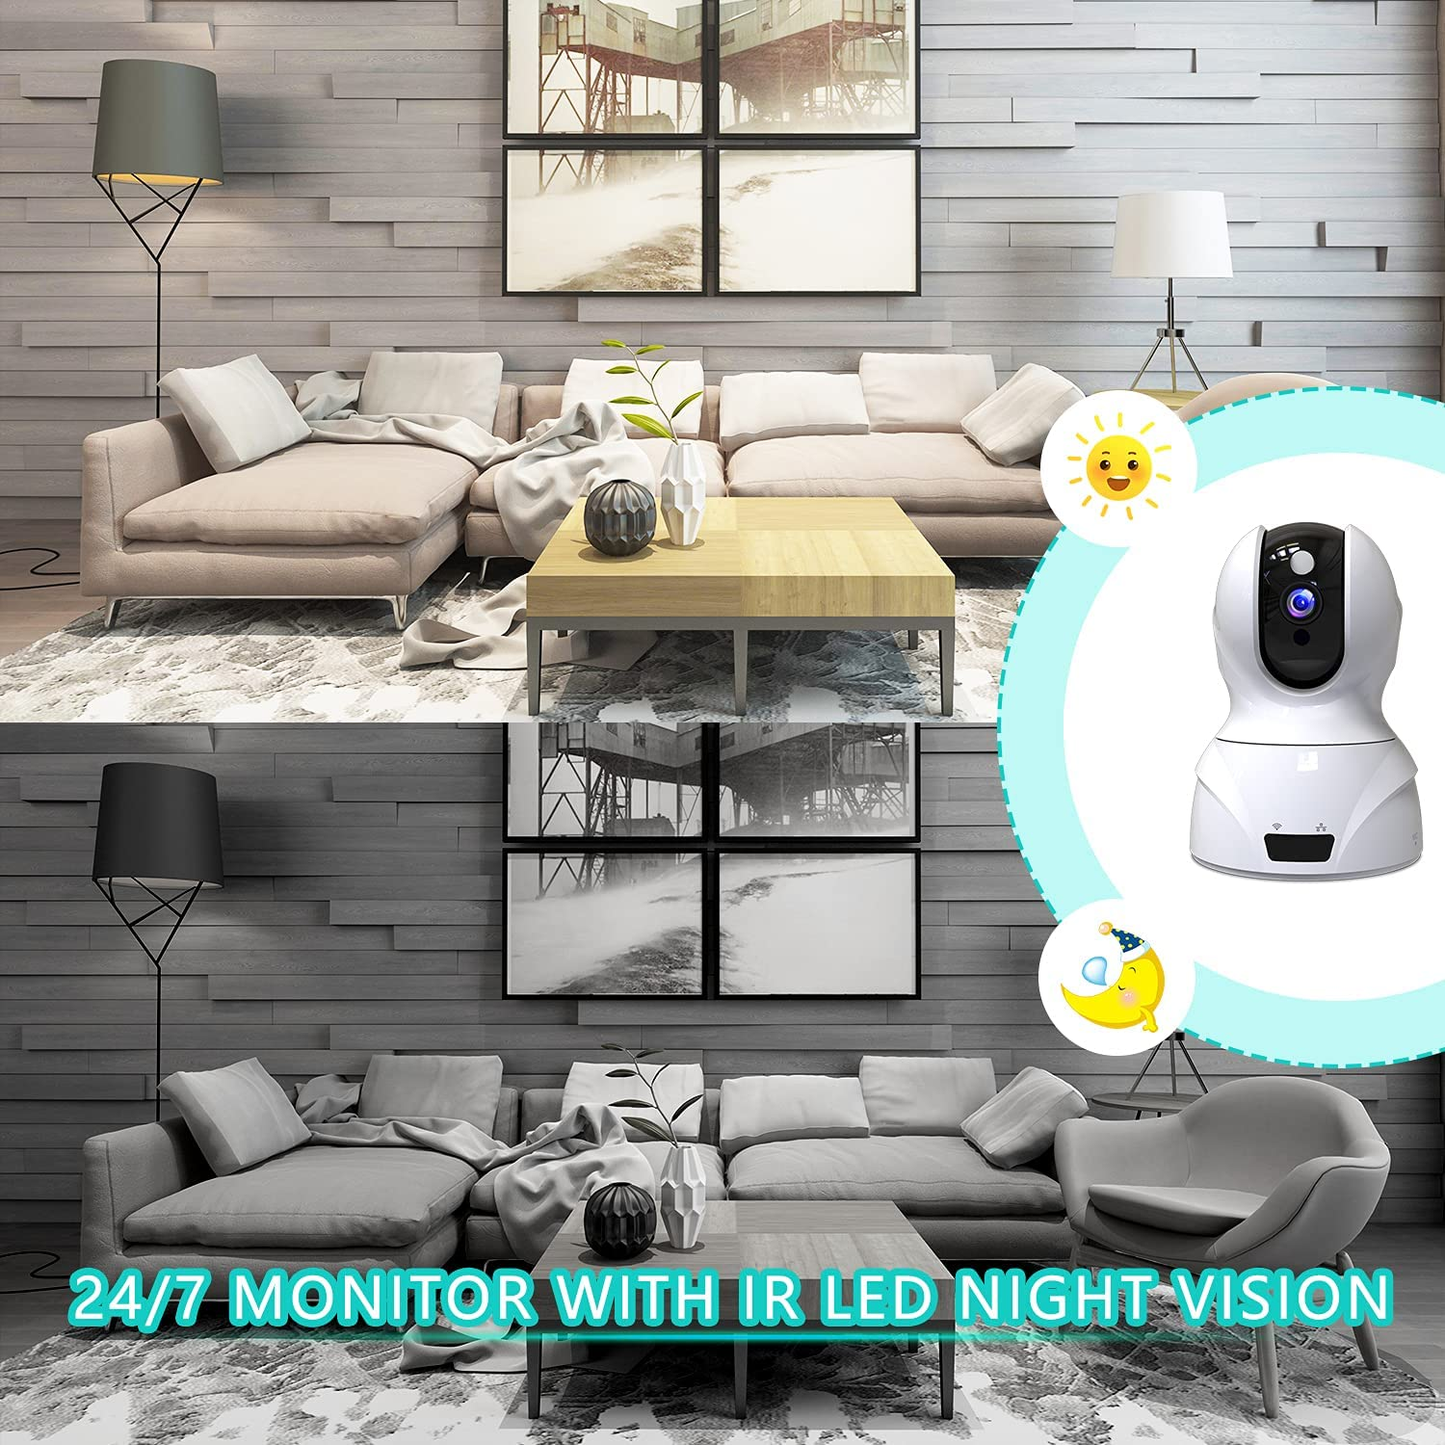 Wireless Security Camera, Pet Camera Wifi Security Surveillance IP Camera Home Monitor with Motion Detection Two-Way Audio Night Vision,White